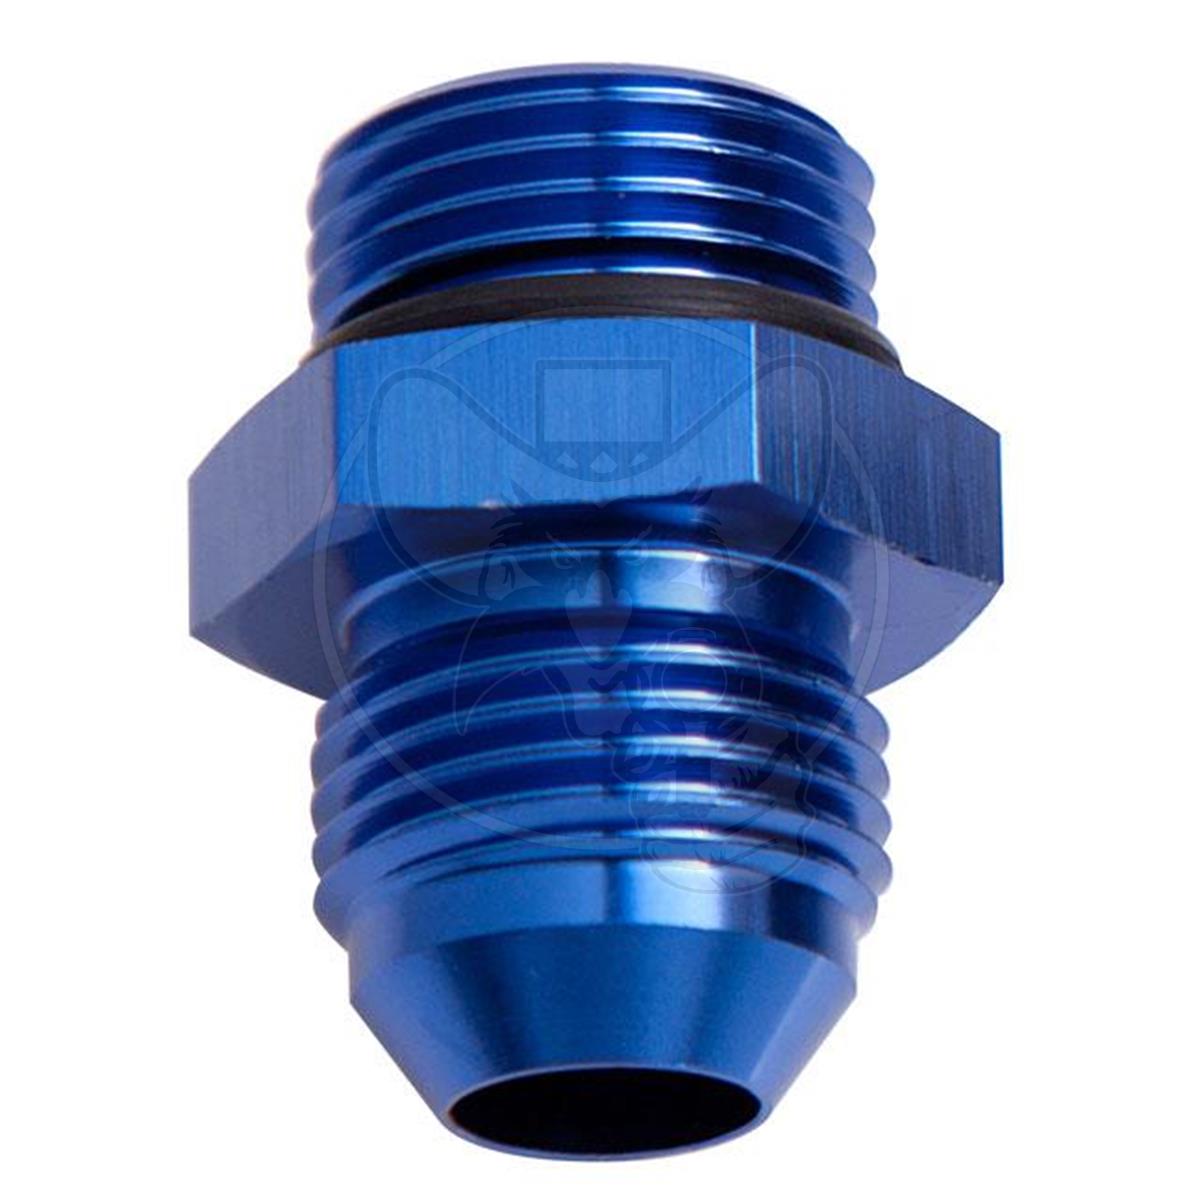 Aeroflow -10 ORB to -4AN Straight Male Flare Adapter - Blue